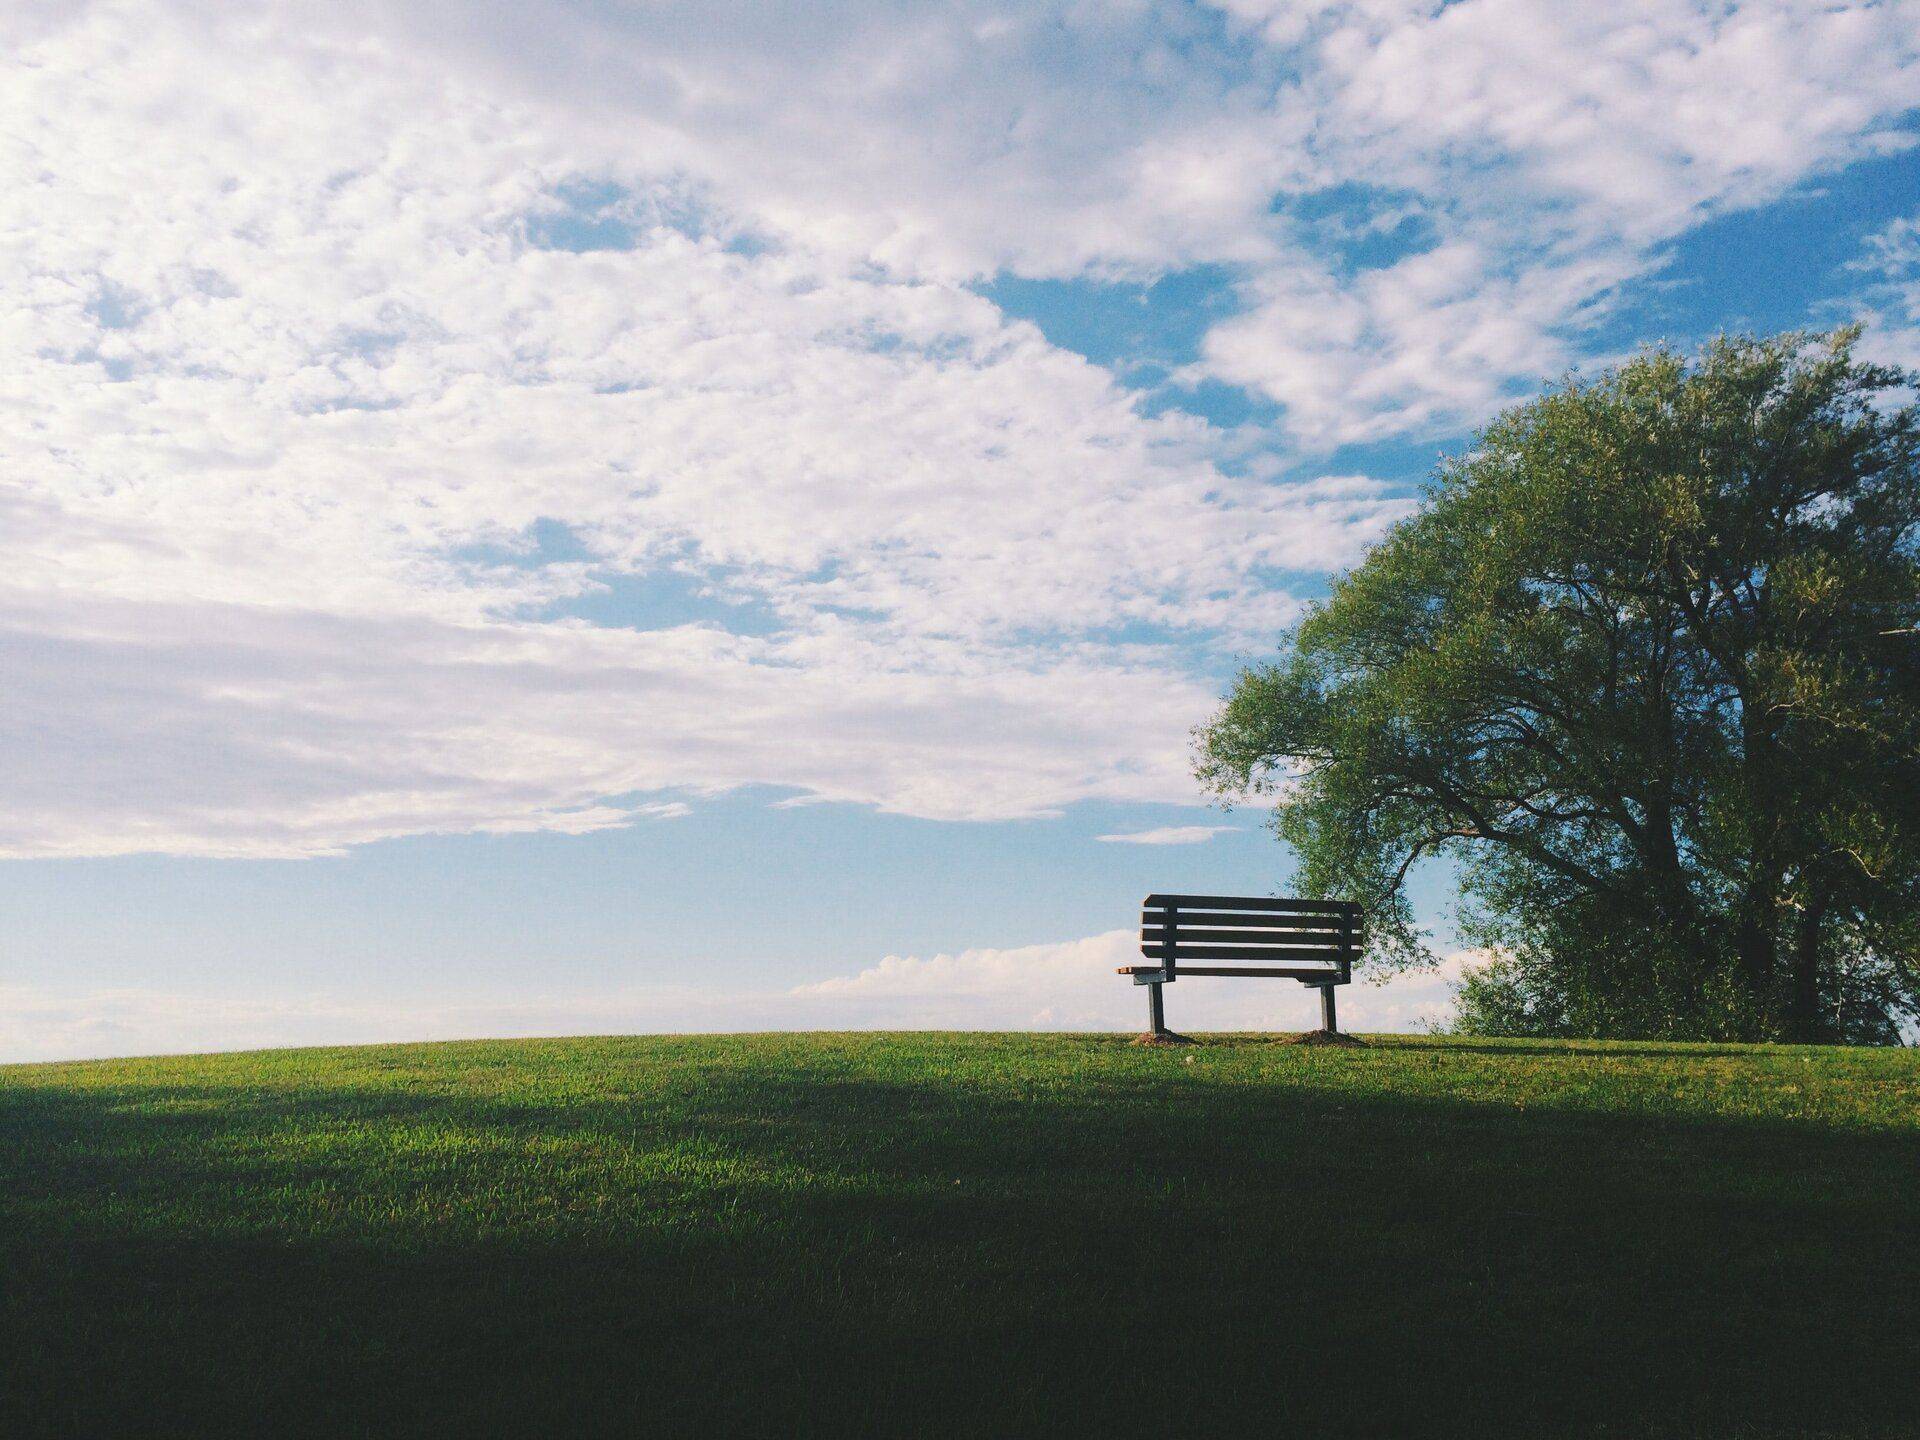 empty bench in park set against vast sky filled with clouds